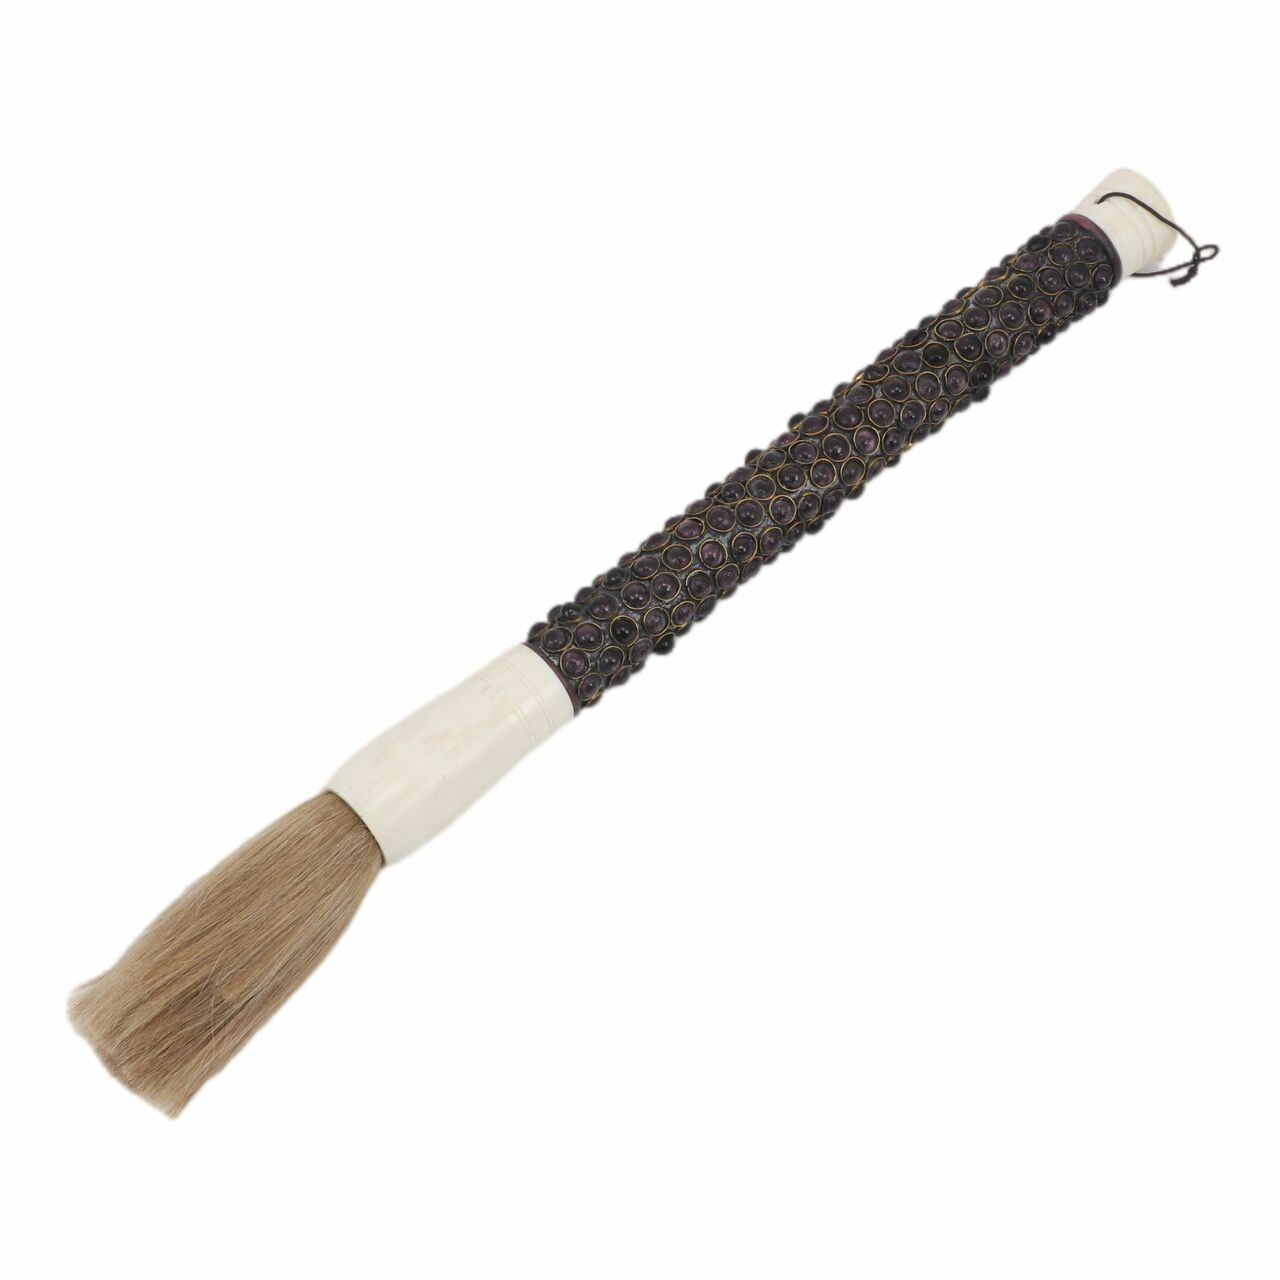 BROWN COLORED BALL BRUSH